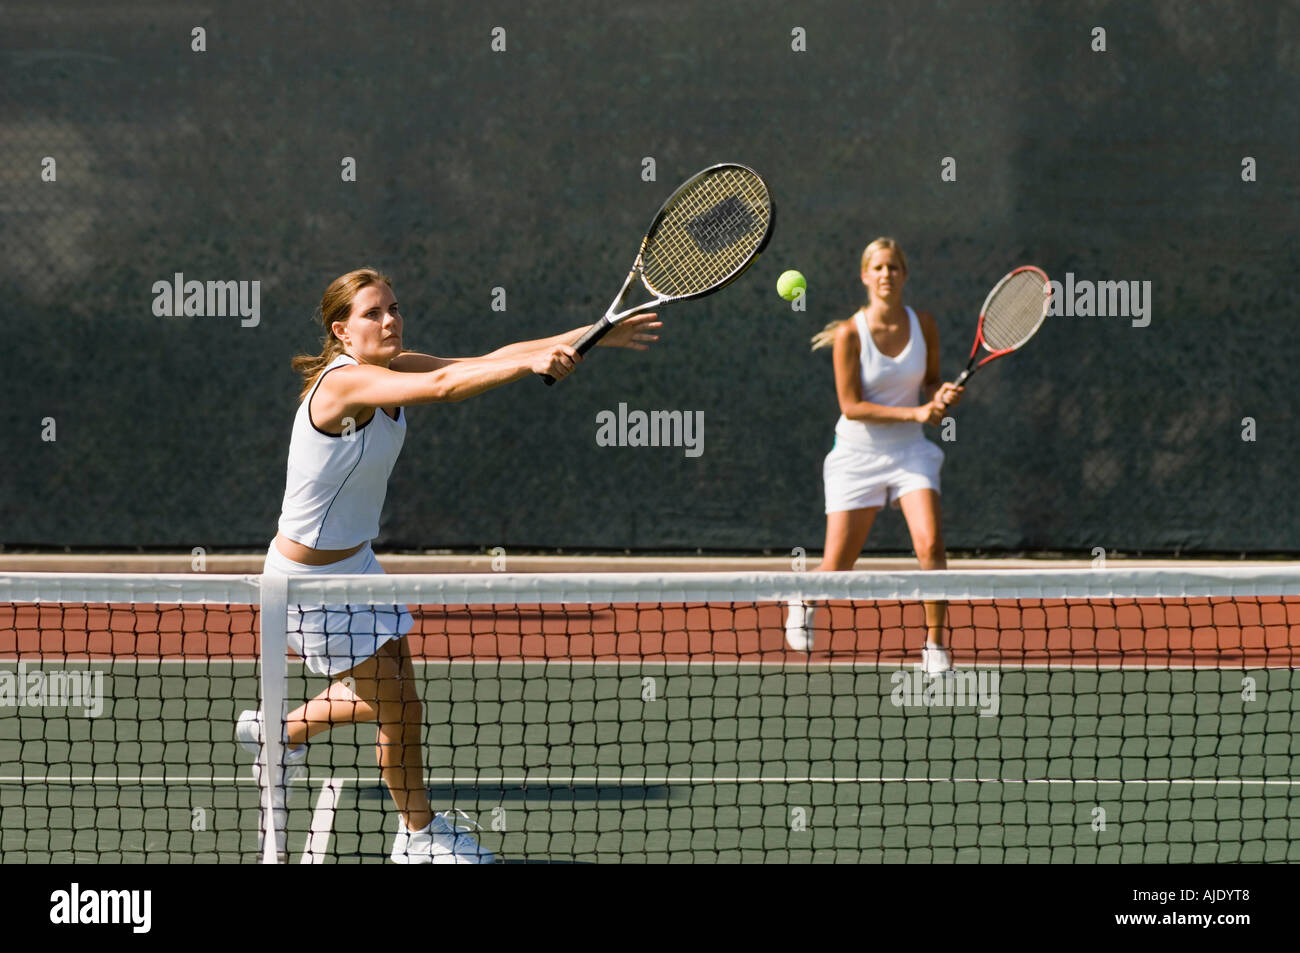 Doubles Player stretching, Hitting tennis ball with Backhand near net Stock Photo